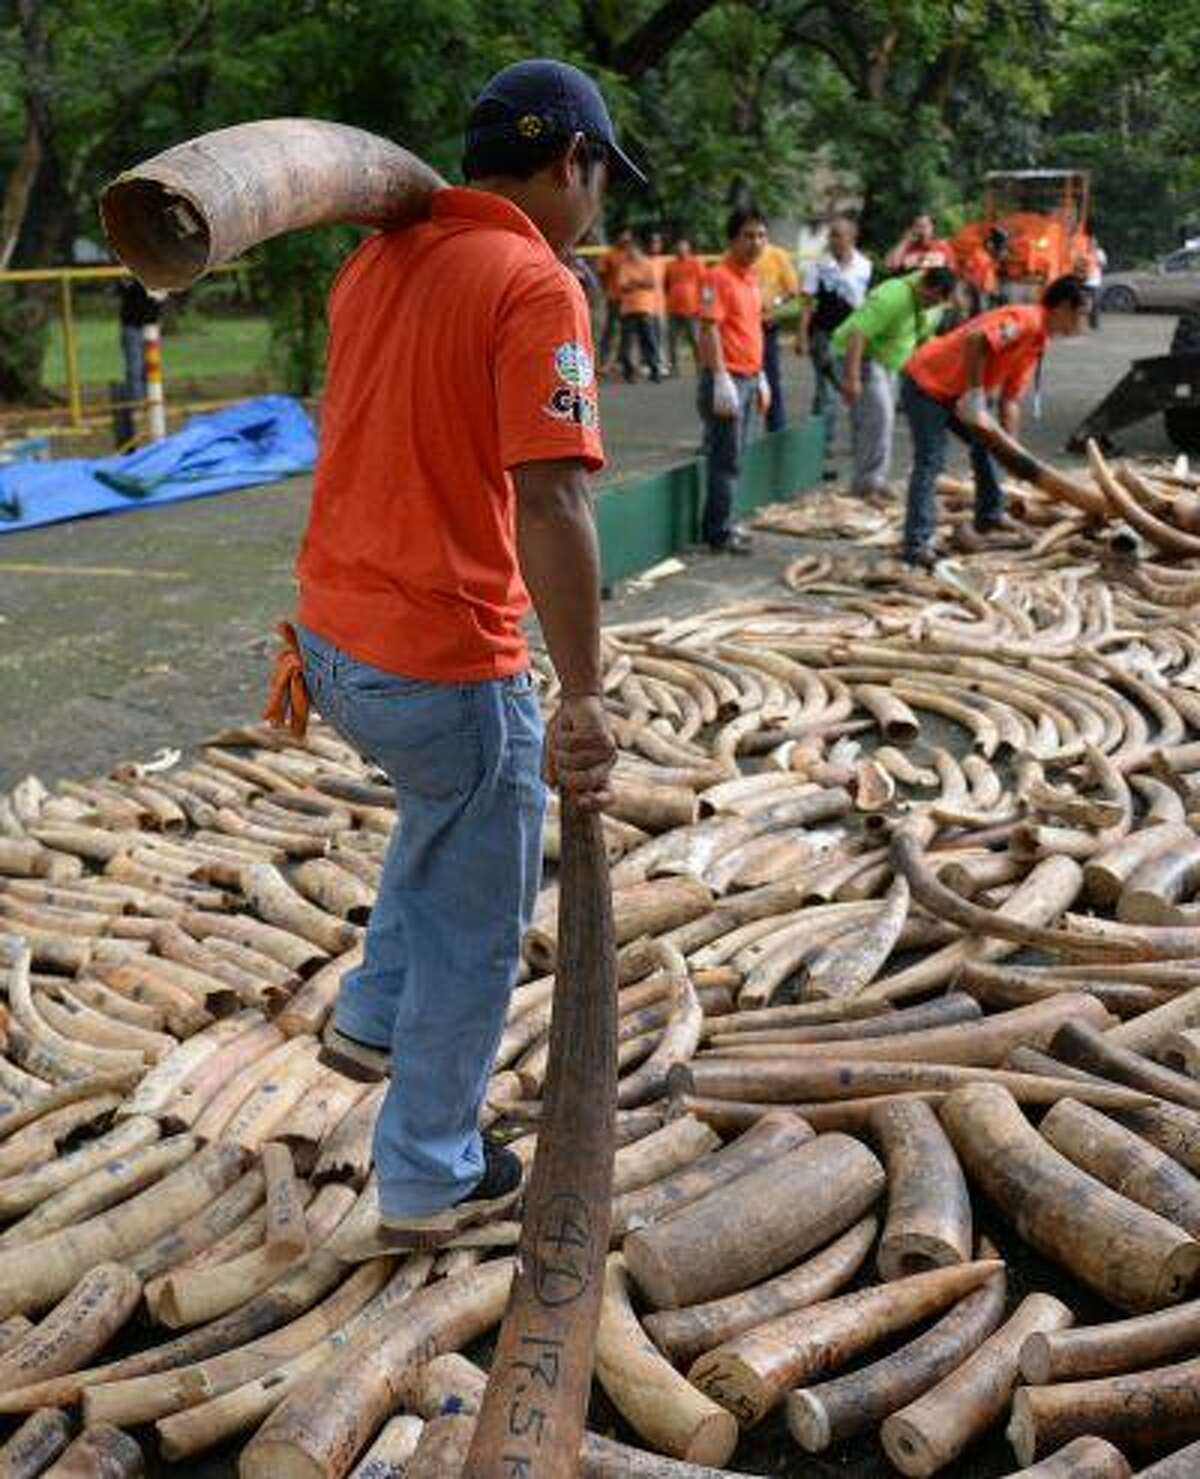 Personnel of the Philippines wildlife bureau carries elephant tusks for destroying at a ceremony in Manila on June 21, 2013. The Philippines began destroying five tonnes of elephant tusks on June 21 in a landmark event aimed at shedding its image as one of the world's worst hotspots for illegal African ivory trading.